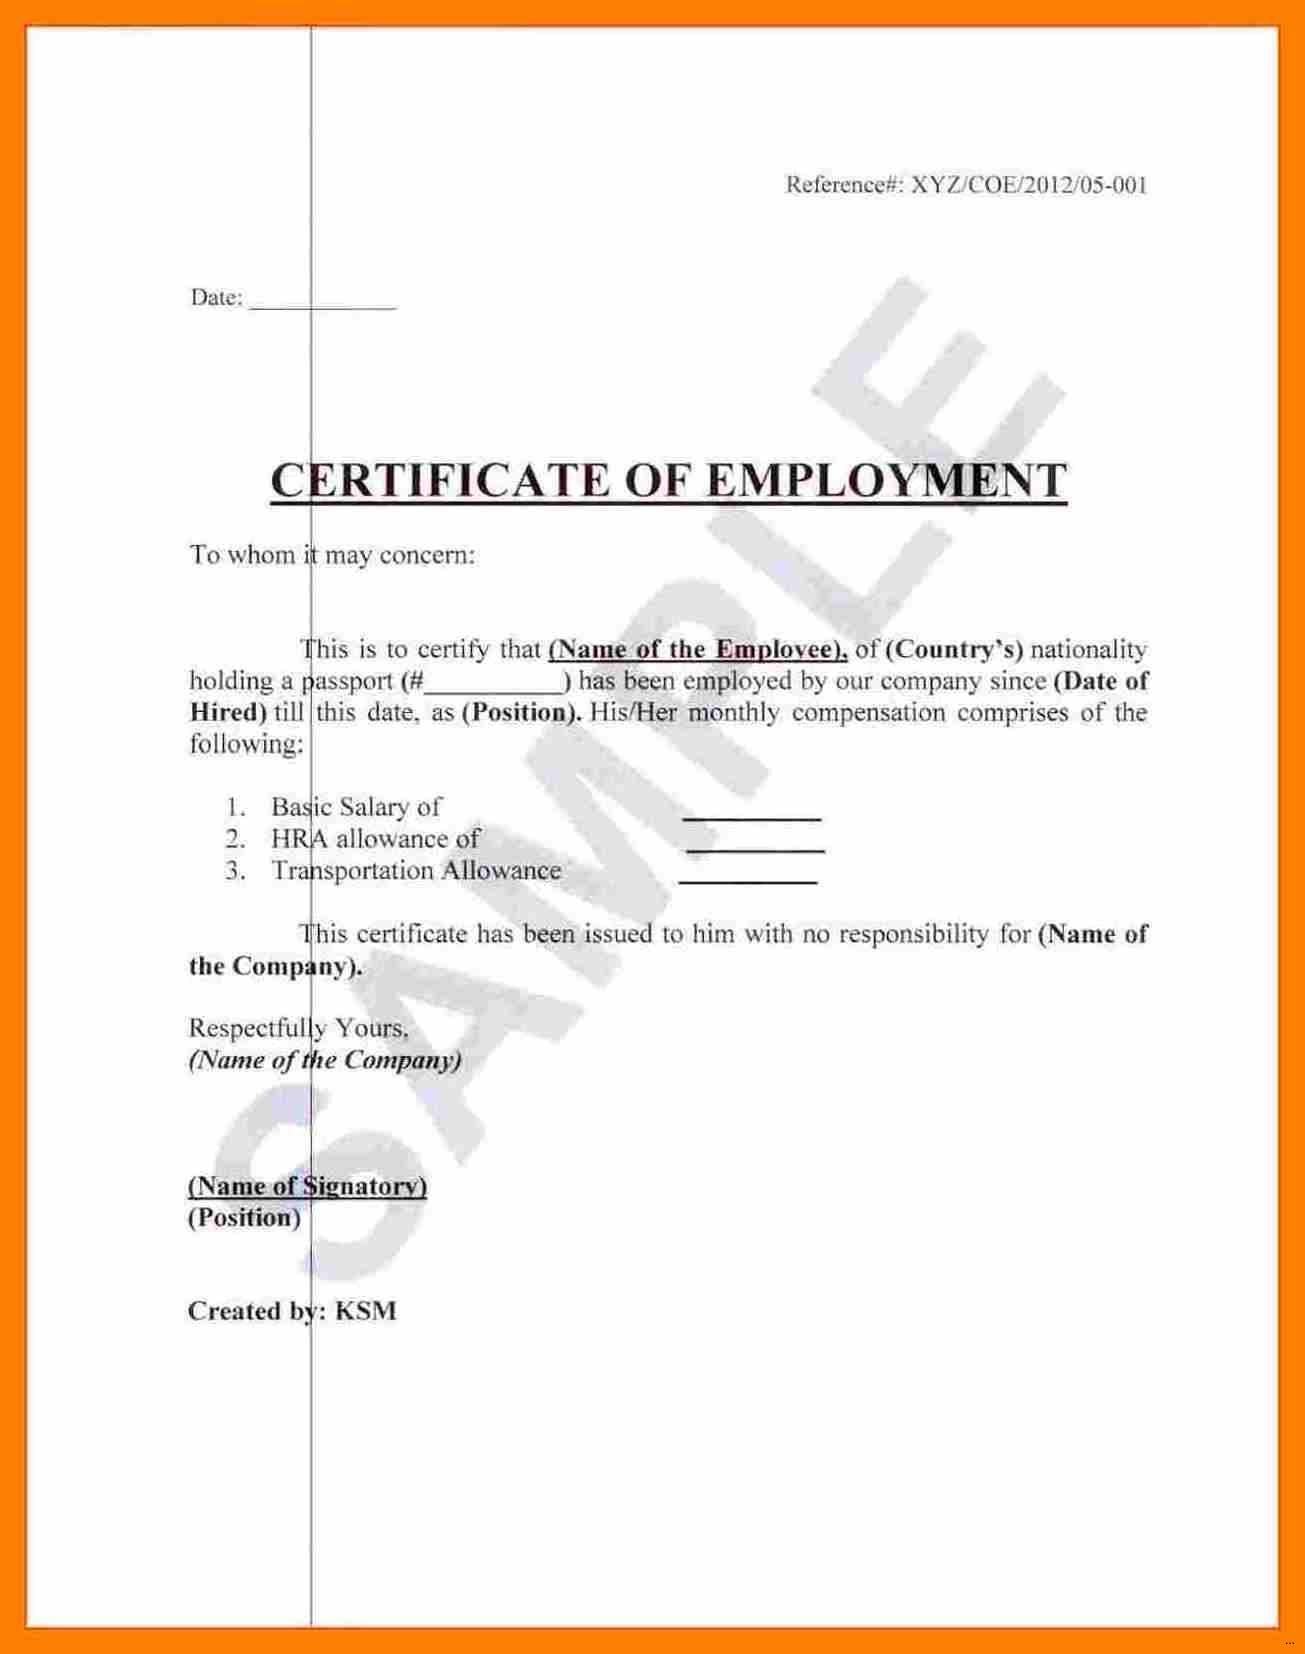 ❤️ Free Printable Certificate of Employment Form Sample Template❤️ With Sample Certificate Employment Template